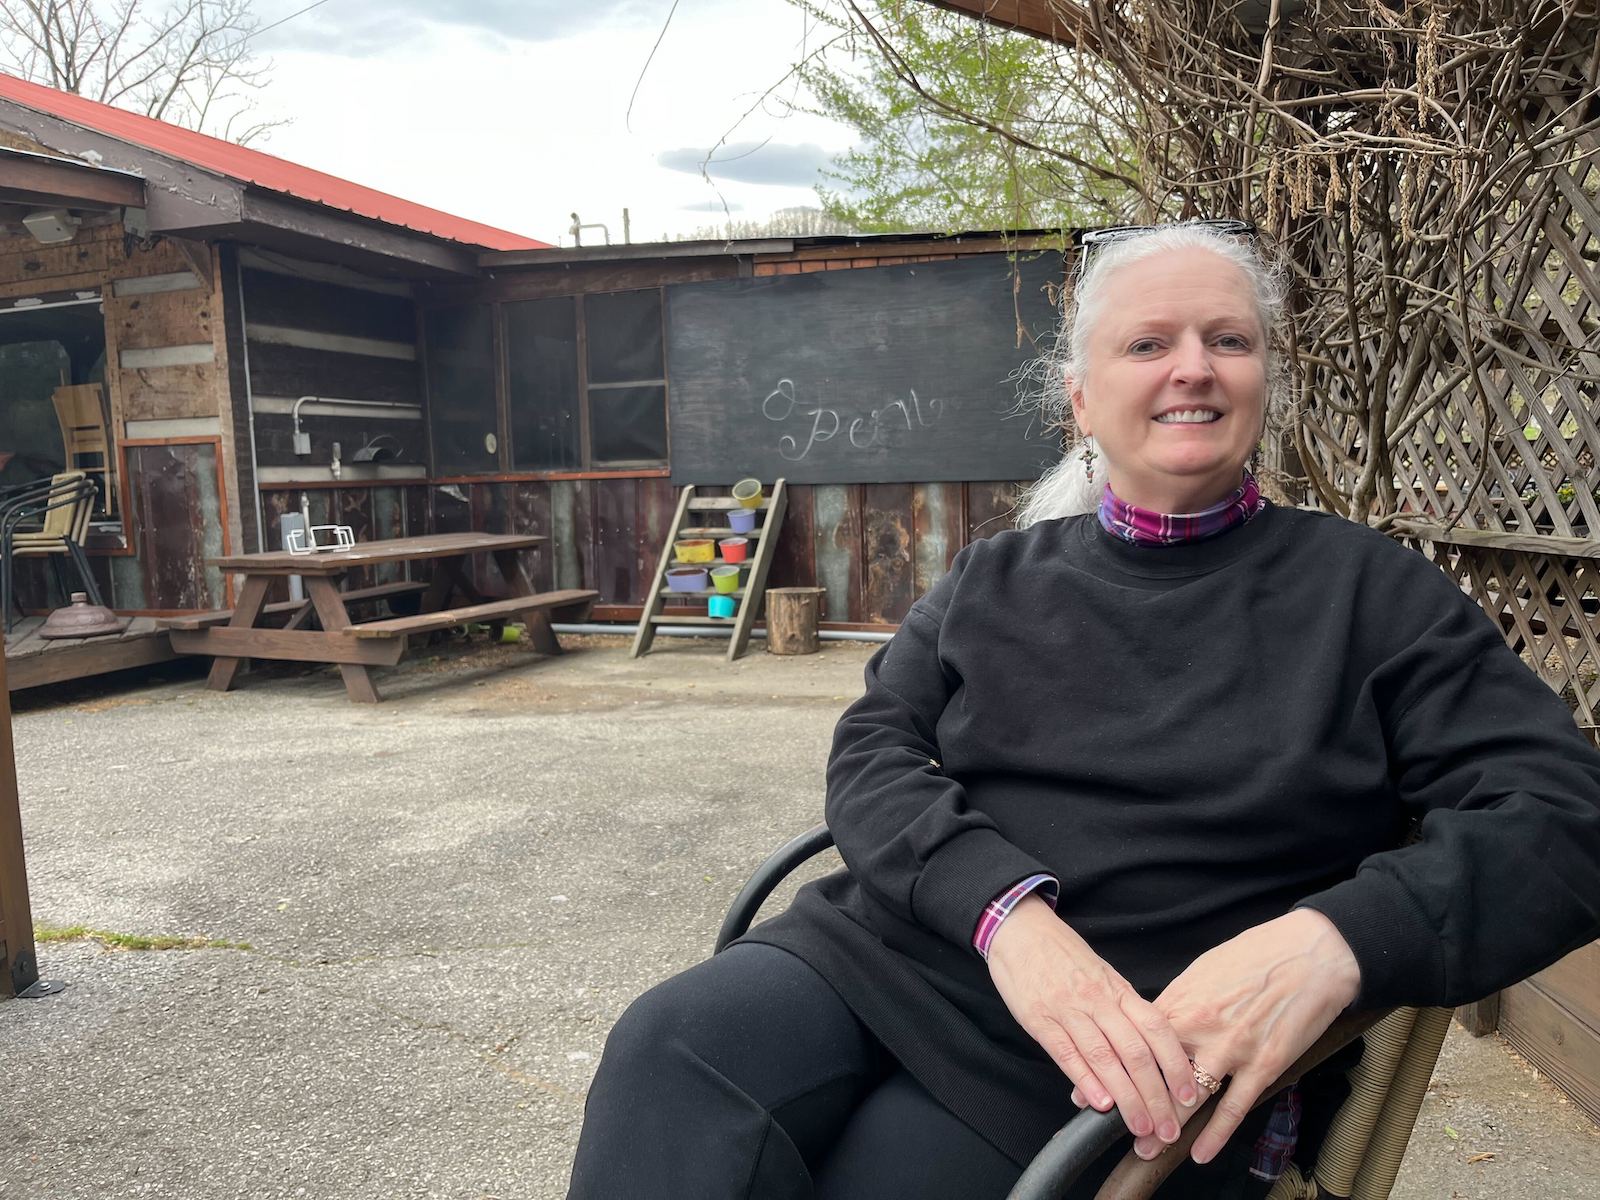 Jamie Brown, an environmental justice organizer from Hartford, Tennessee, sits in a deck chair outside a cafe. She wears a black shirt over a red plaid turtleneck and black pants.